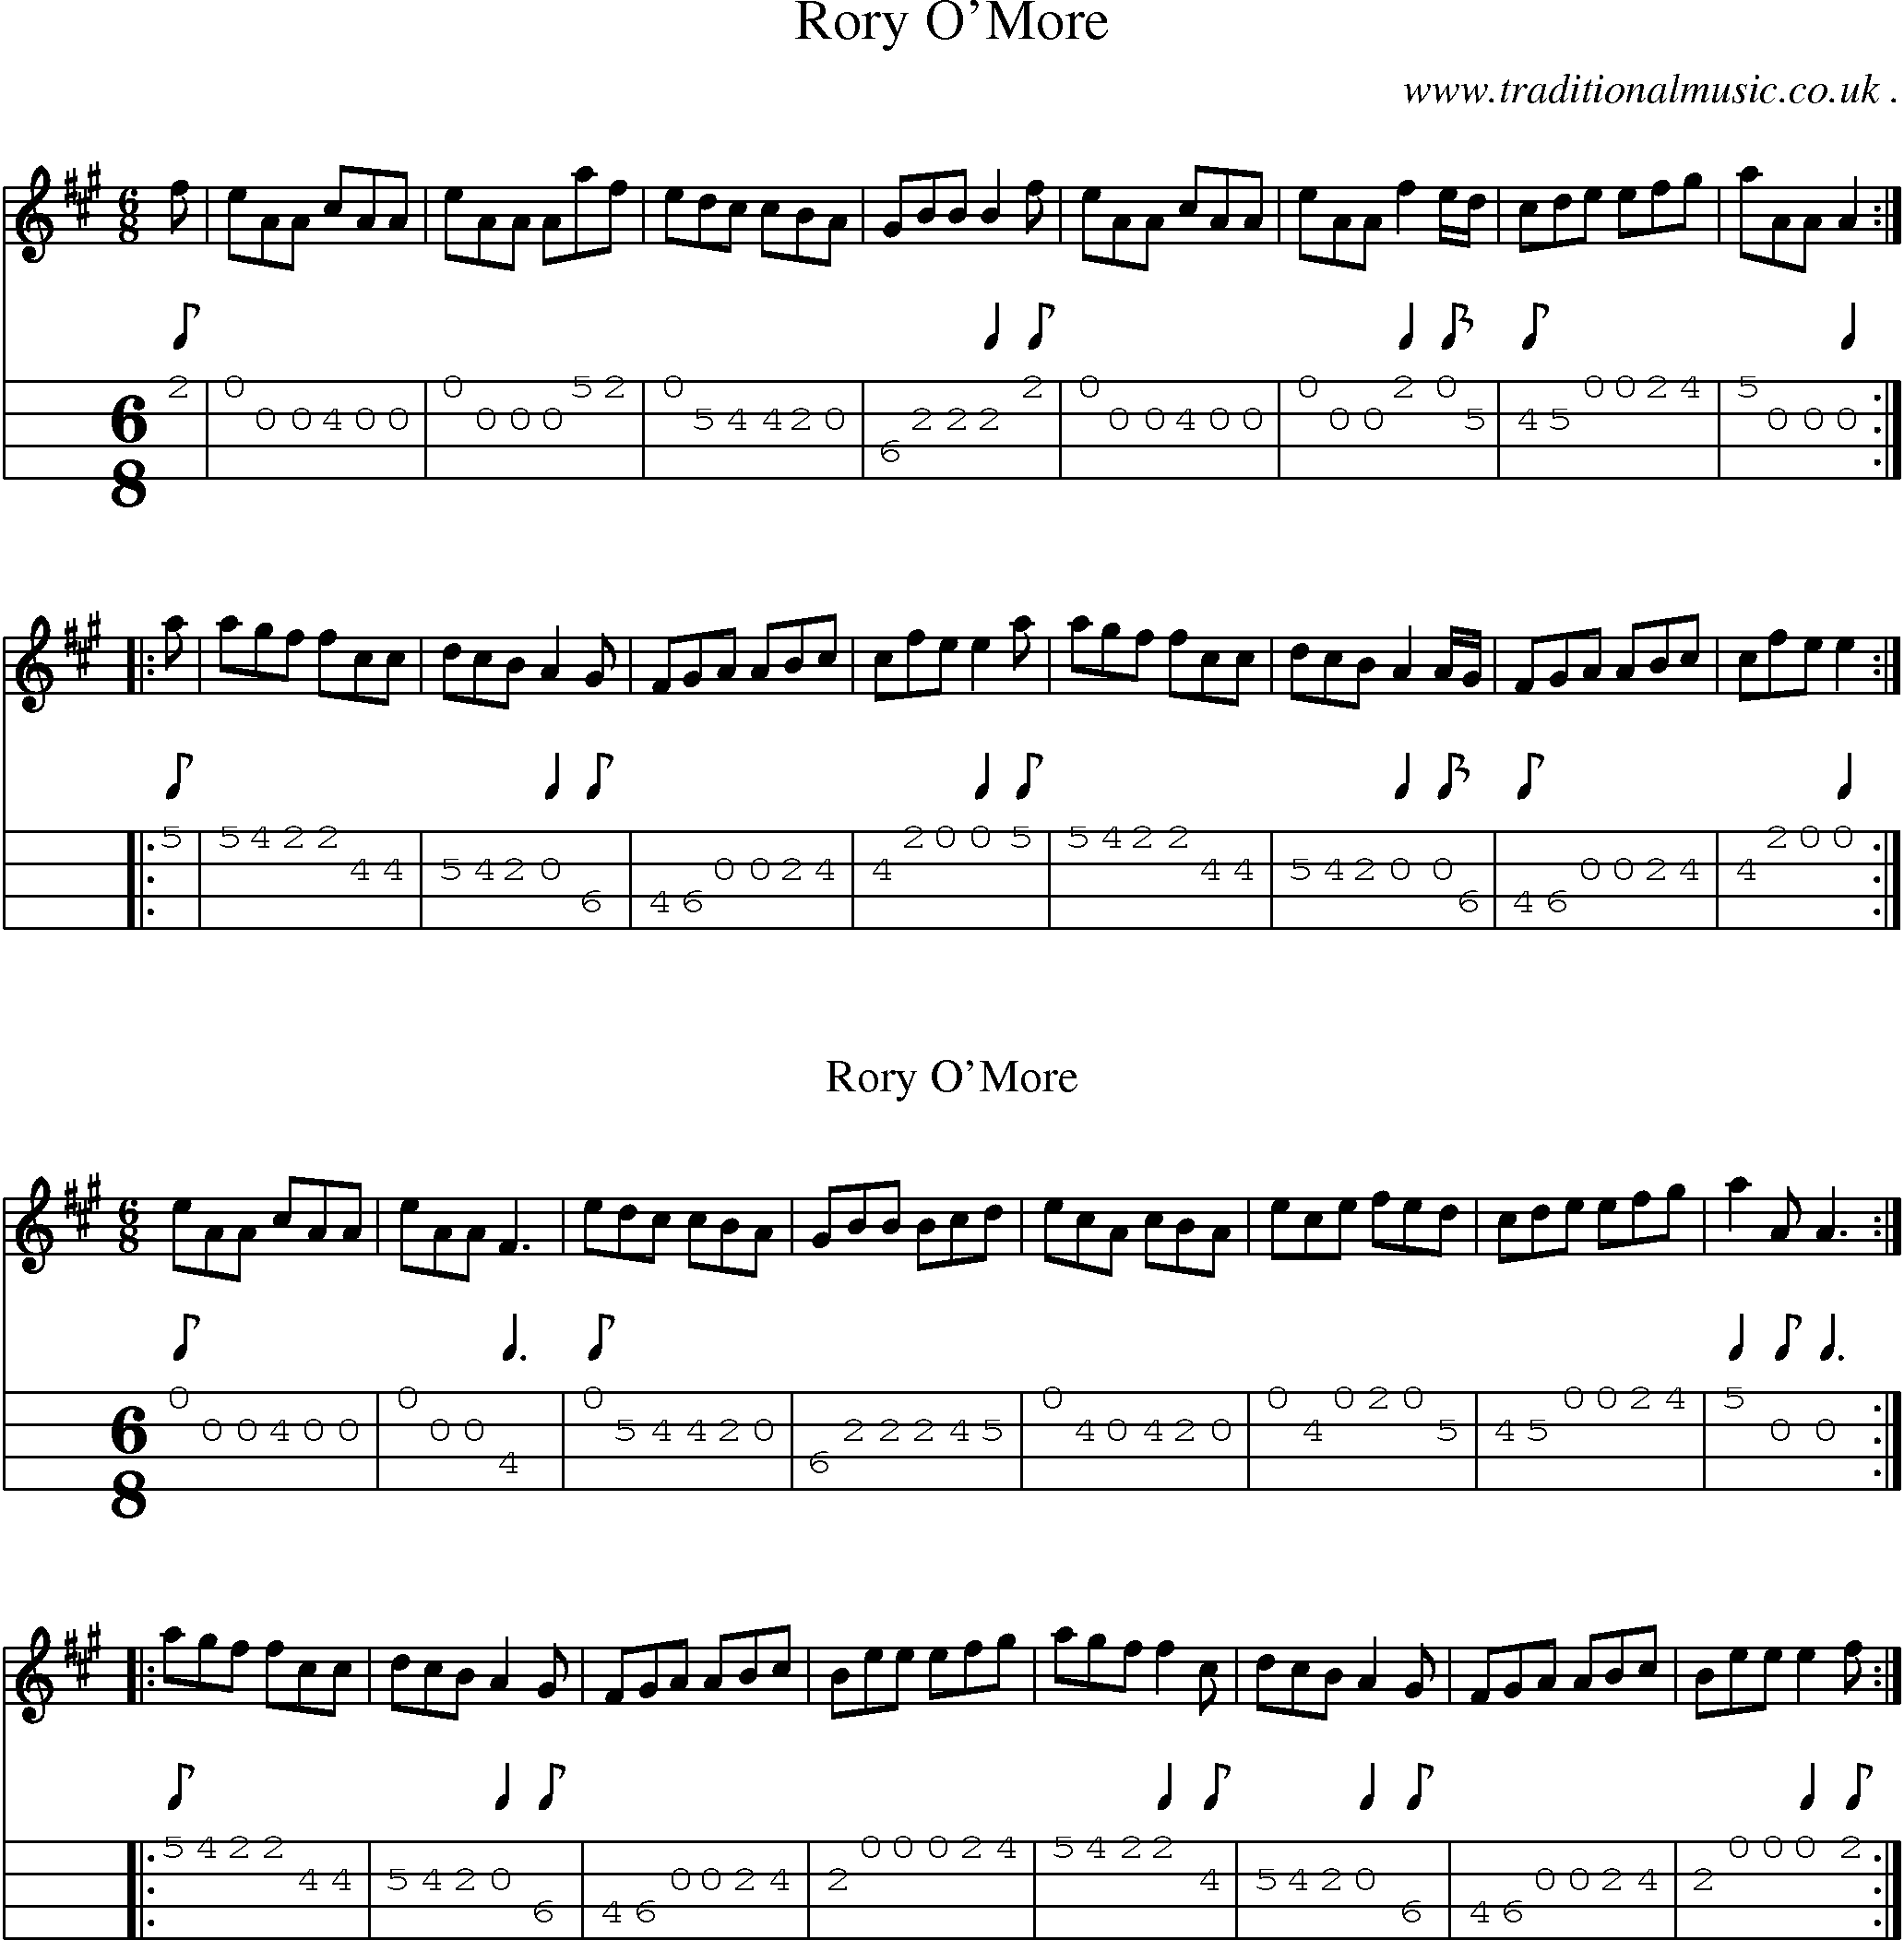 Sheet-music  score, Chords and Mandolin Tabs for Rory Omore